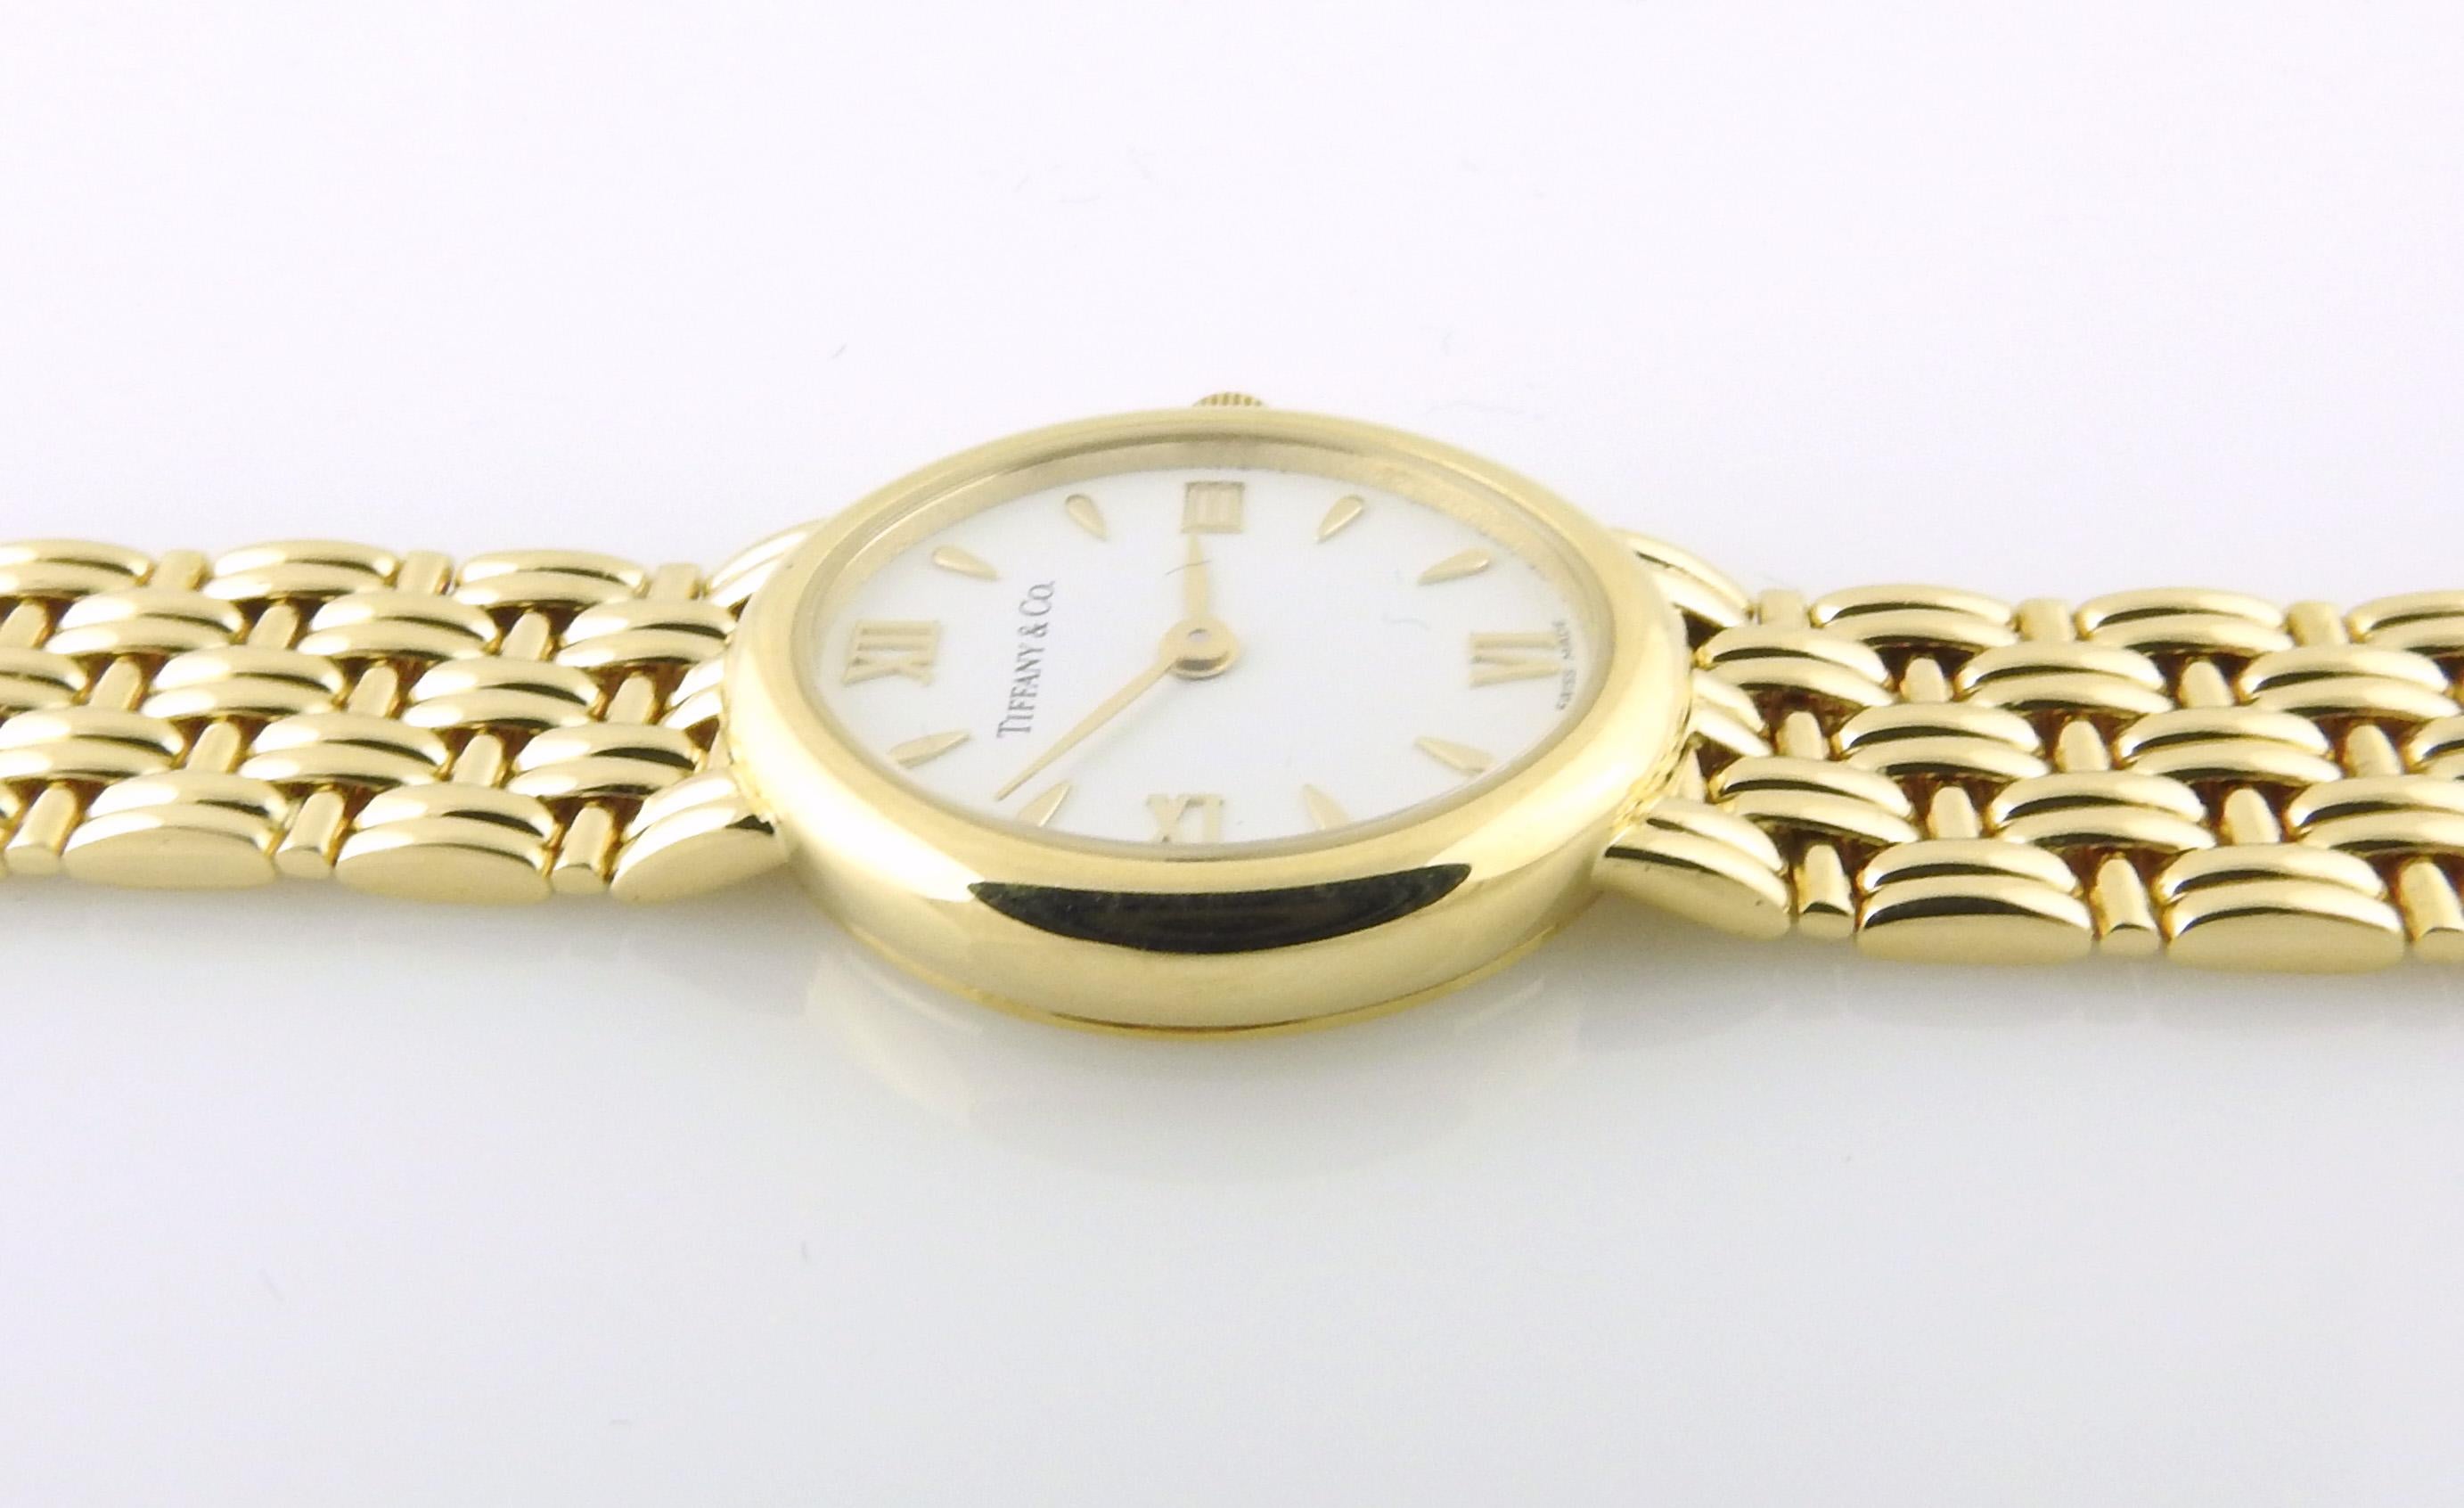 Tiffany & Co. 18k Yellow Gold Ladies Watch White Dial Basket Weave Band 3